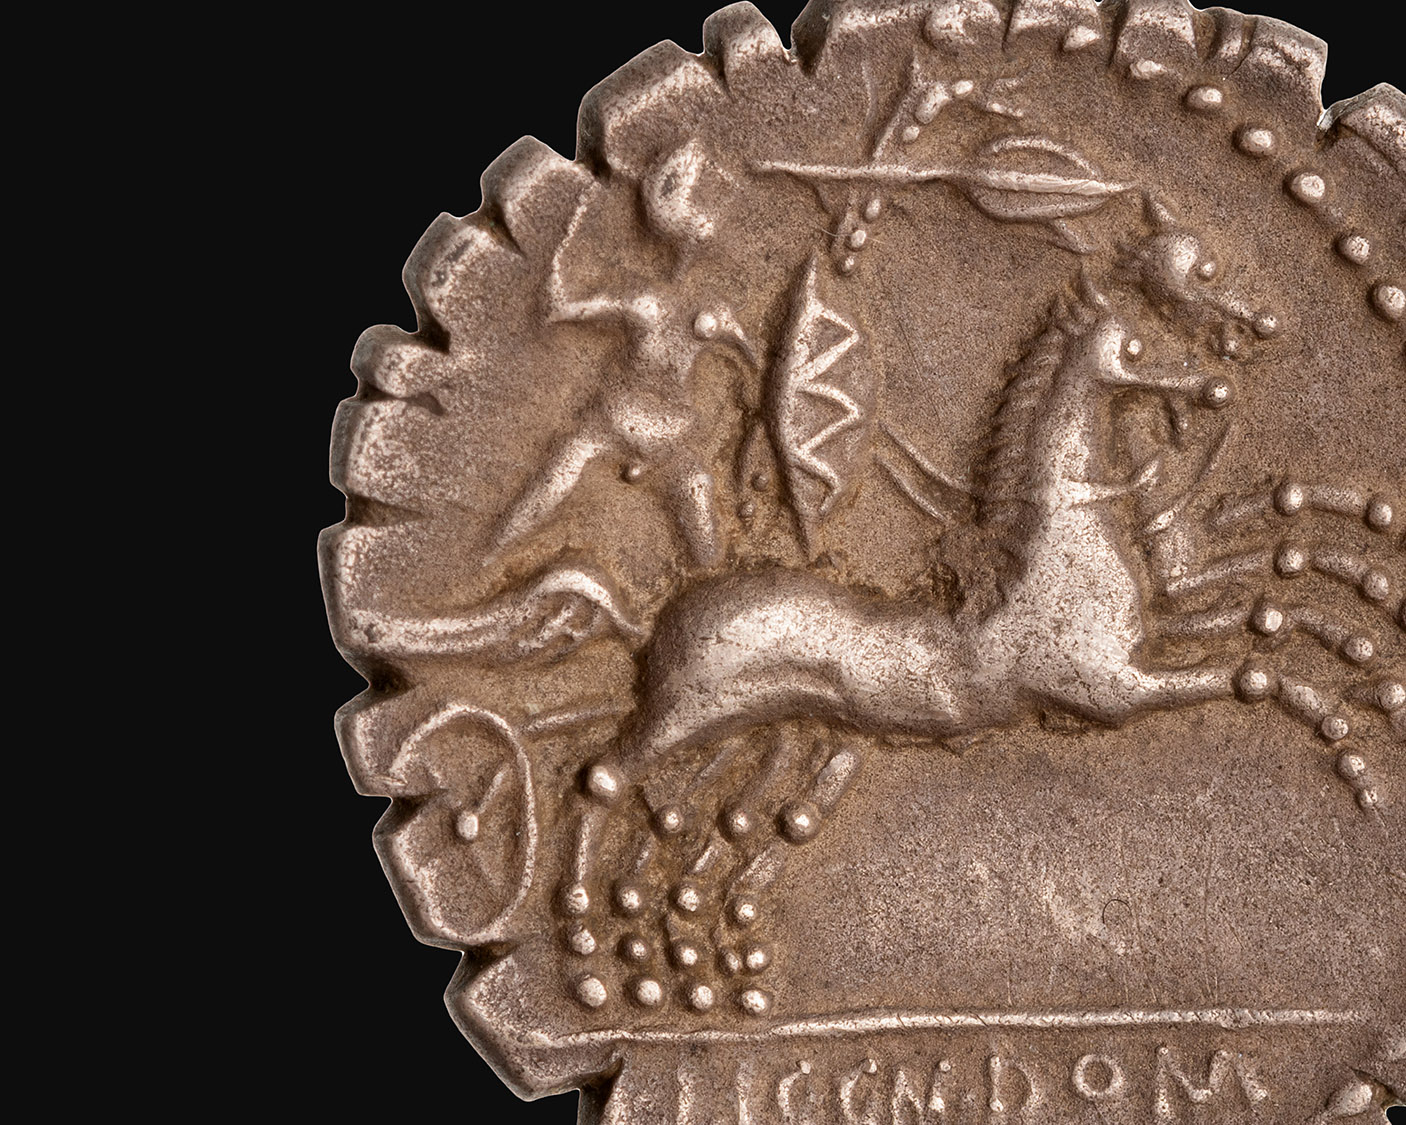 Long Table 153. The Gallic Connection: Roman Coinage, Silver Bullion, and the Via Domitia